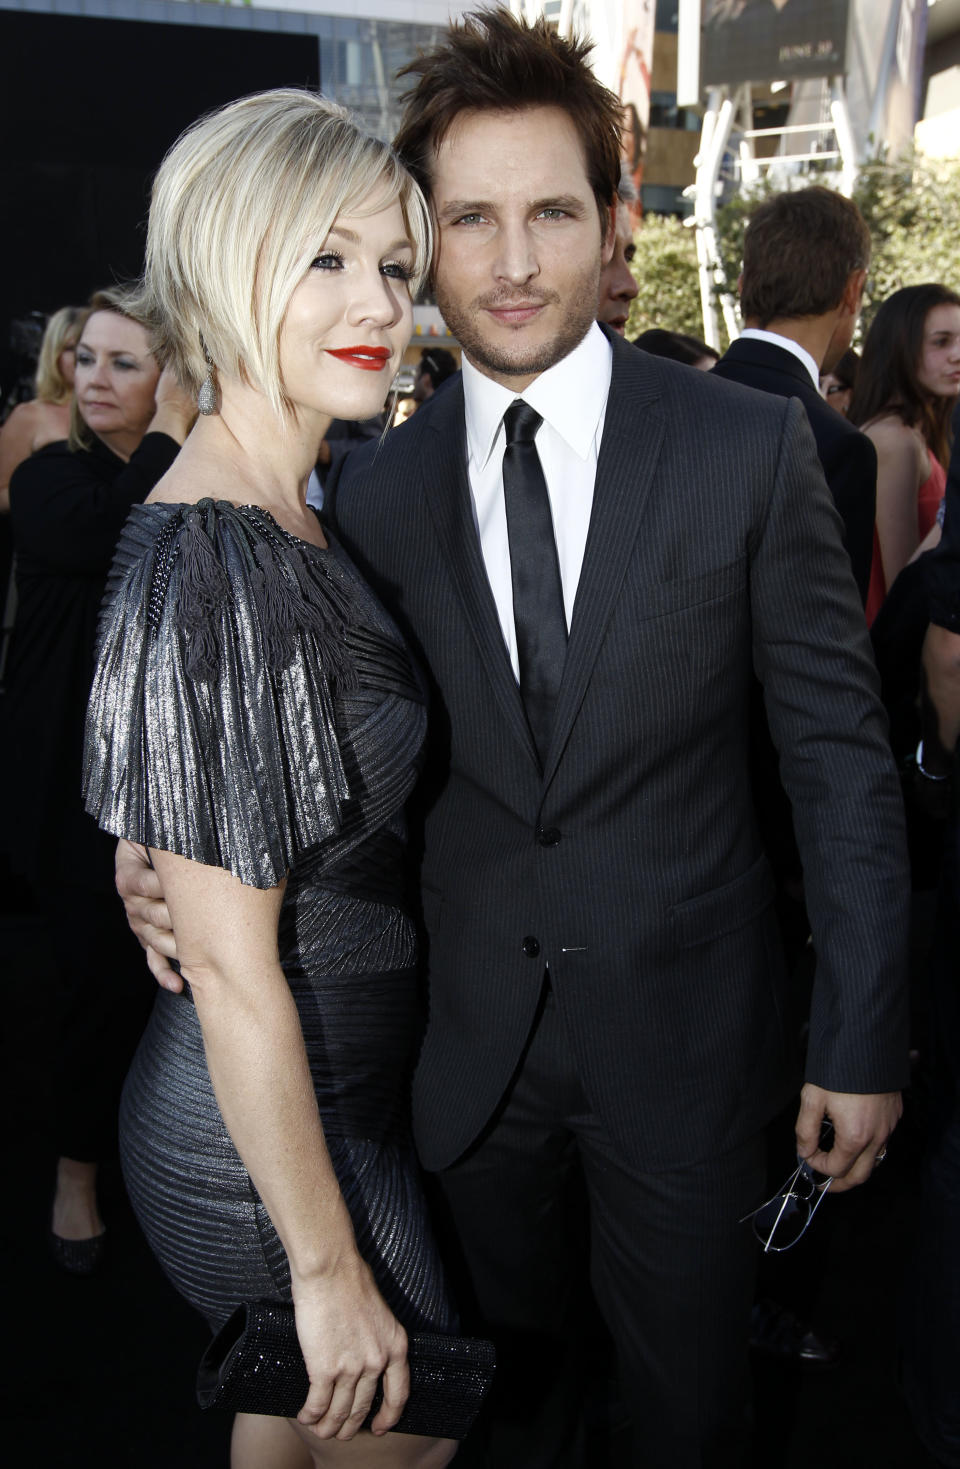 FILE - In this June 24, 2010 file photo, actress Jennie Garth, left, and her husband actor Peter Facinelli arrive at the premiere of "The Twilight Saga: Eclipse" in Los Angeles. The couple filed for divorce in Los Angeles on Wednesday, March 28, 2012, citing irreconcilable differences for their breakup after nearly 11 years of marriage. They have three children together. (AP Photo/Matt Sayles, file)